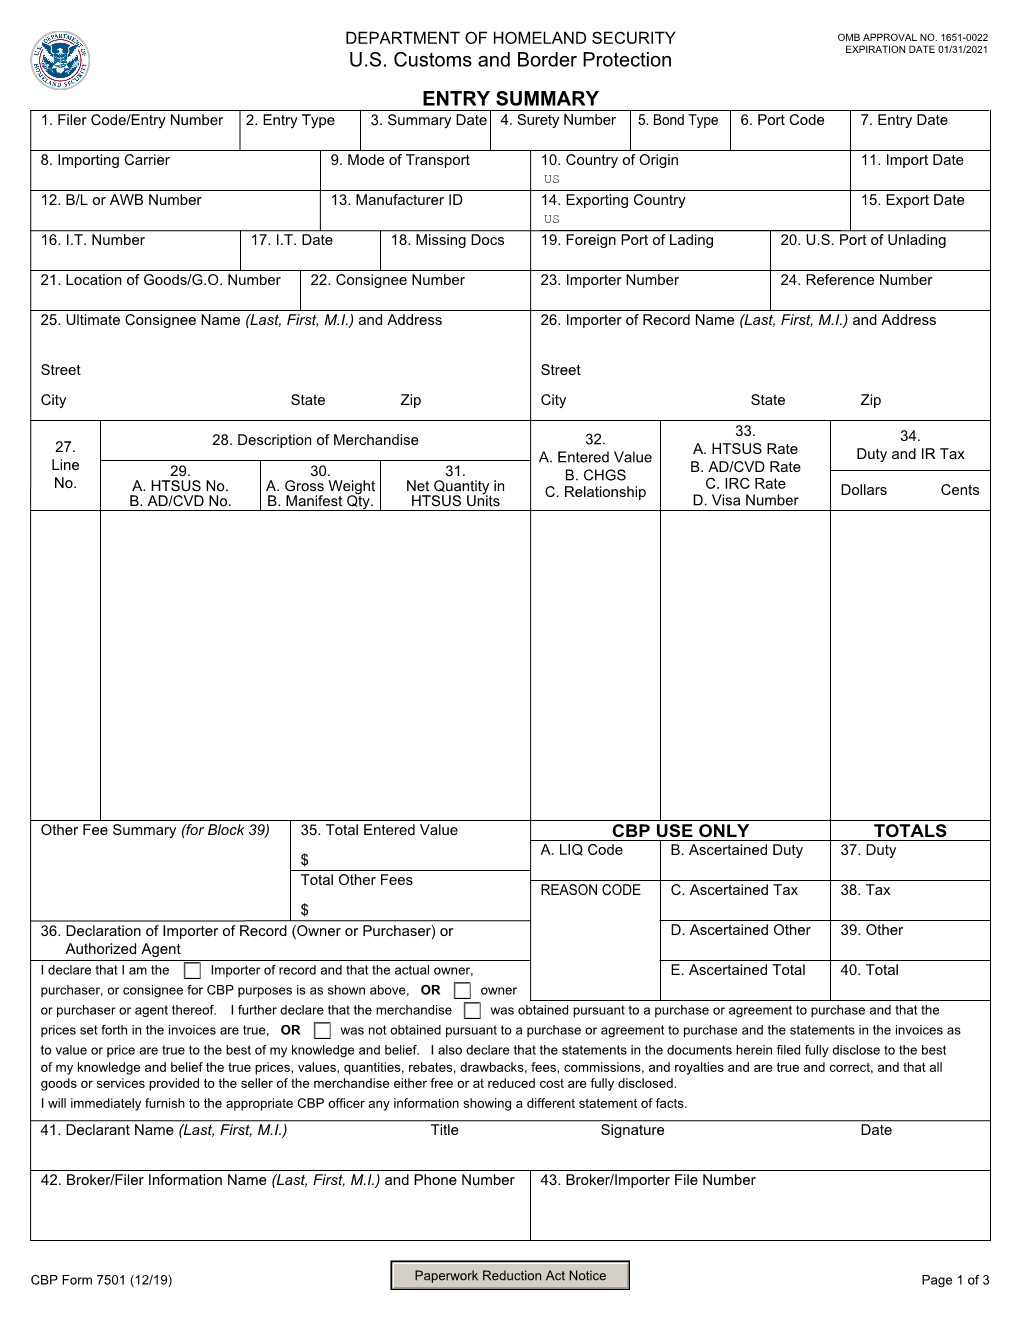 CBP Form 7501 (12/19) Page 1 of 3 DEPARTMENT of HOMELAND SECURITY U.S